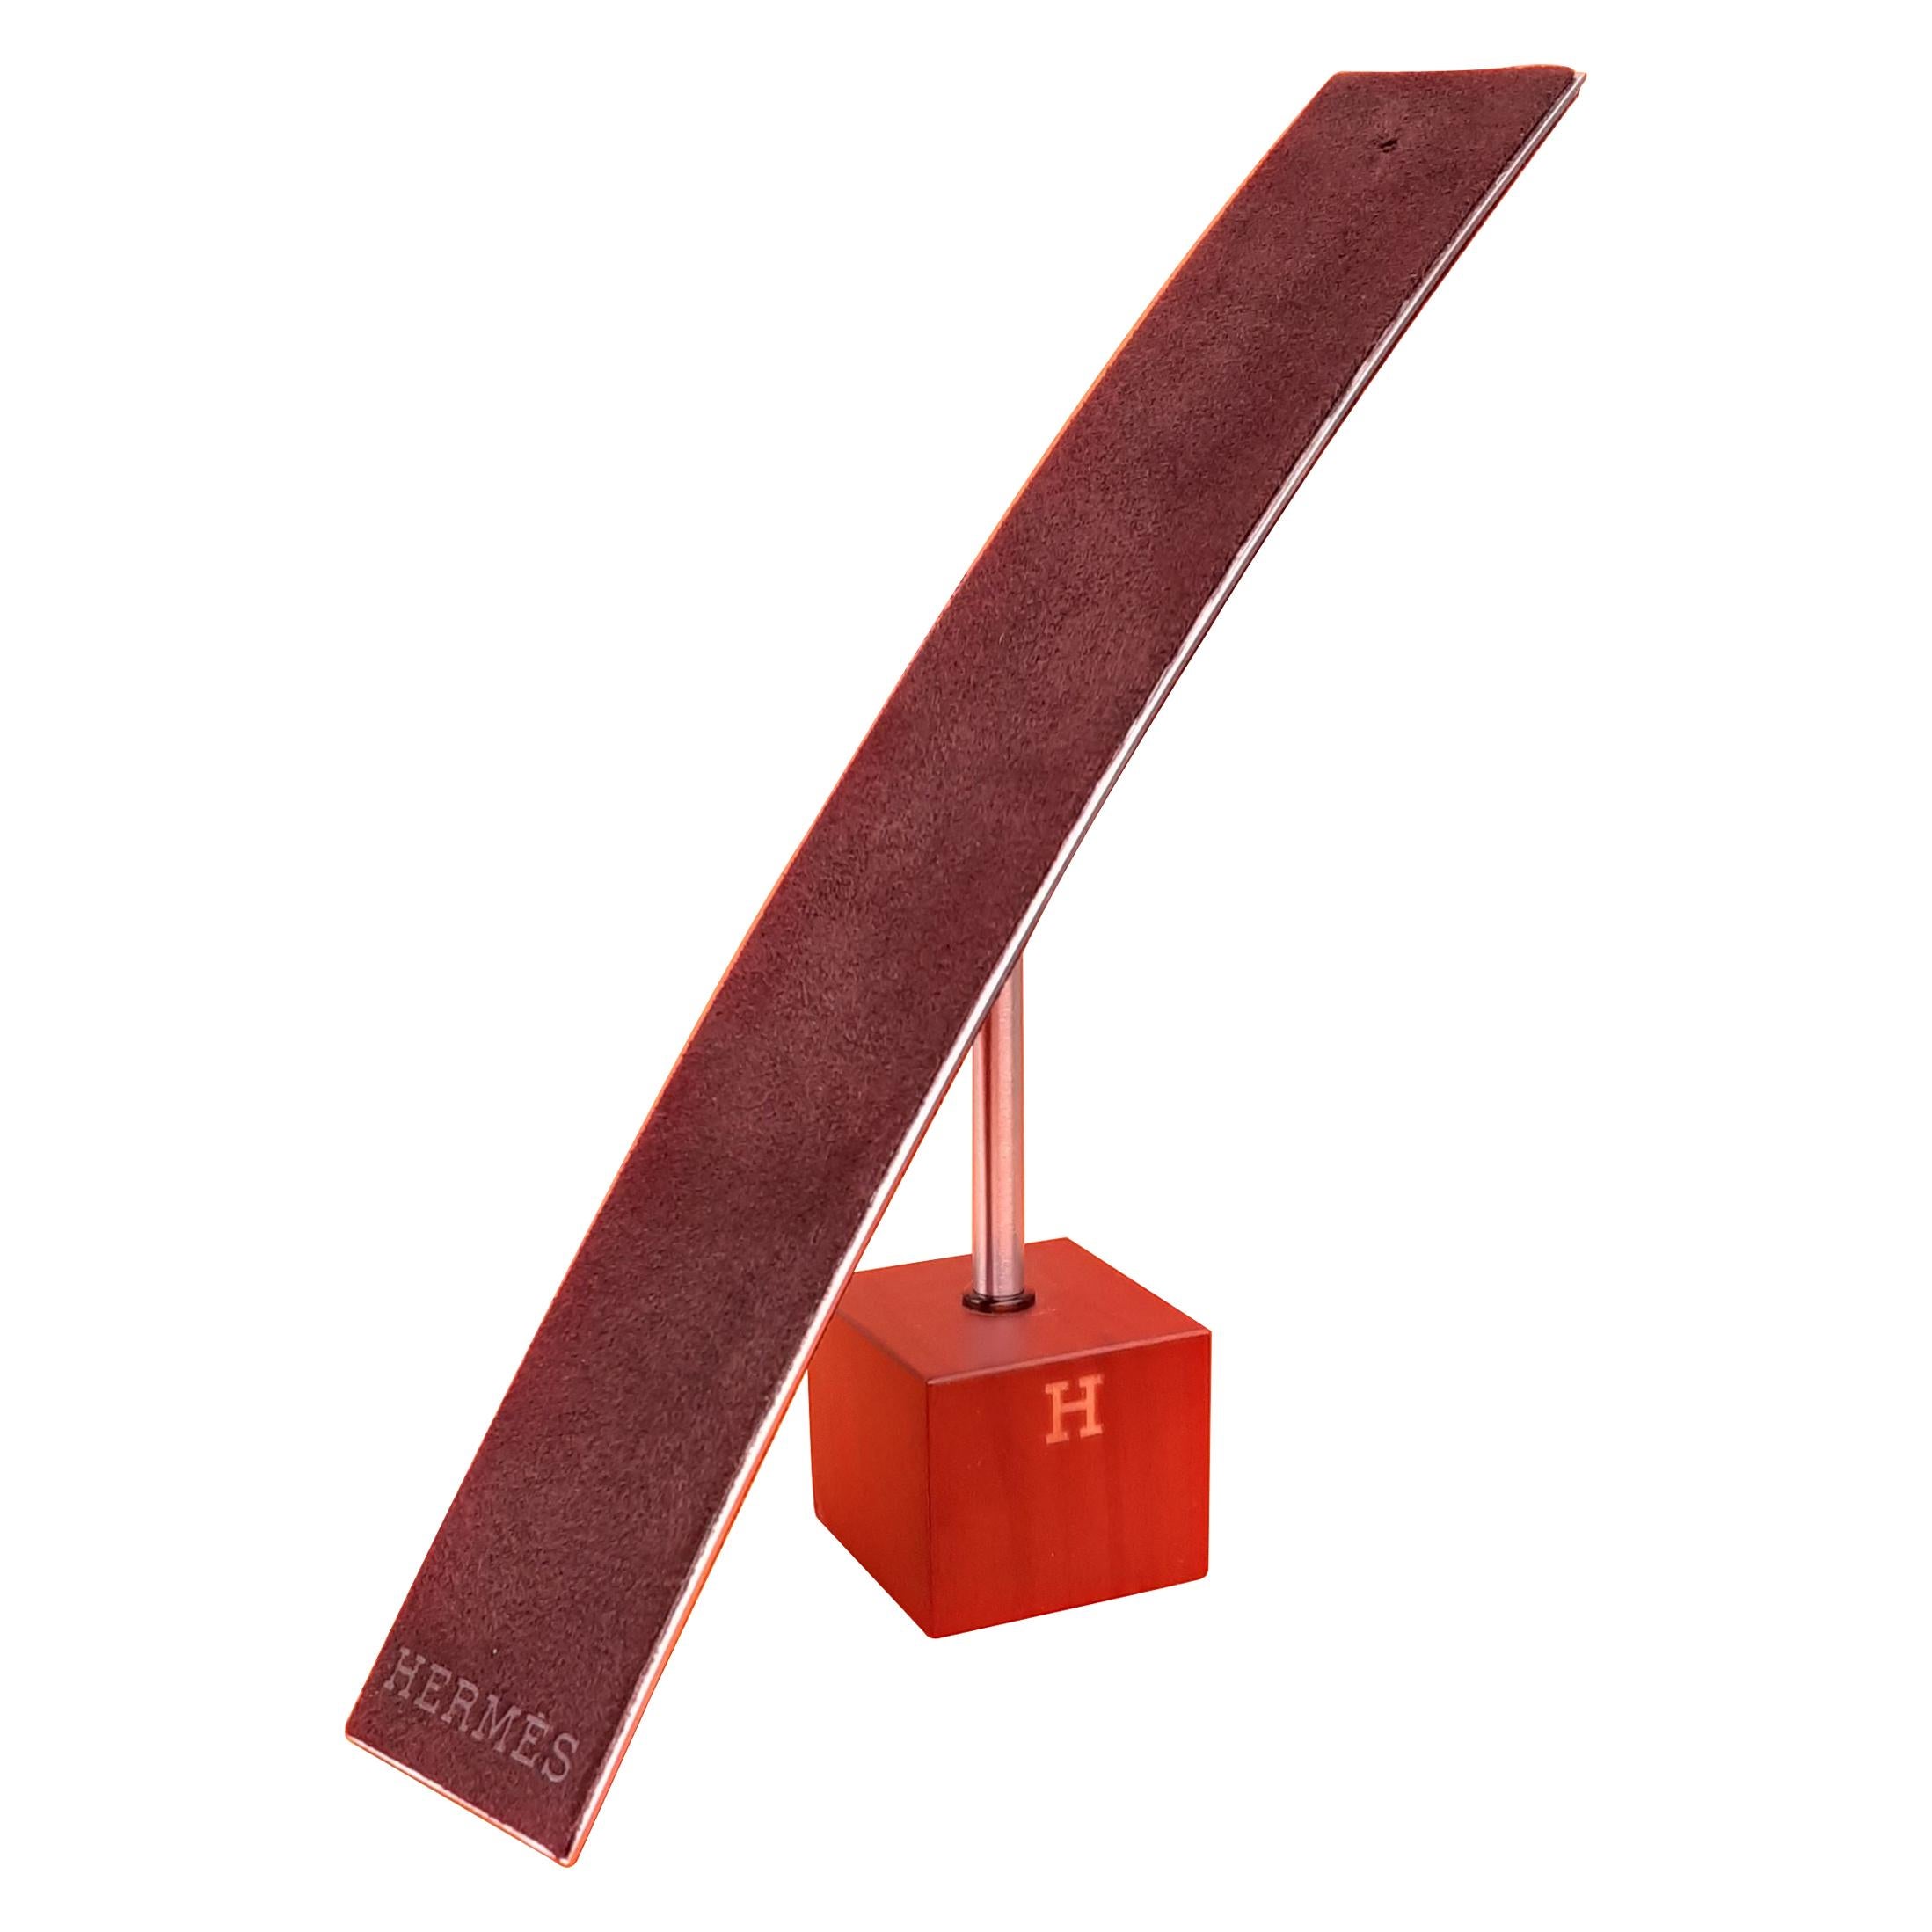 Hermès Watch or Jewelry Display Stand Holder in Felt and Wood